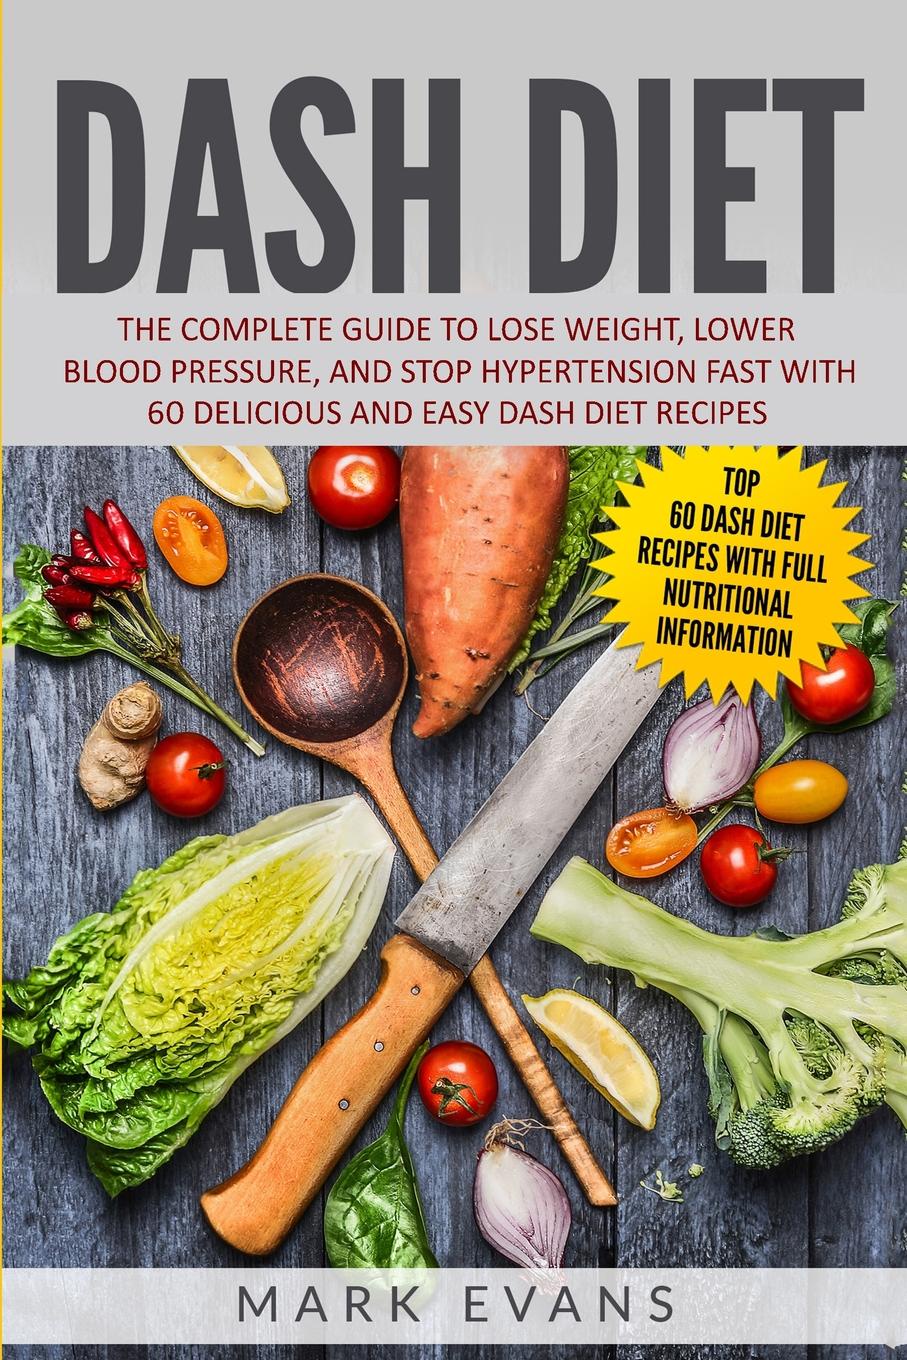 DASH Diet. The Complete Guide to Lose Weight, Lower Blood Pressure, and Stop Hypertension Fast With 60 Delicious and Easy DASH Diet Recipes